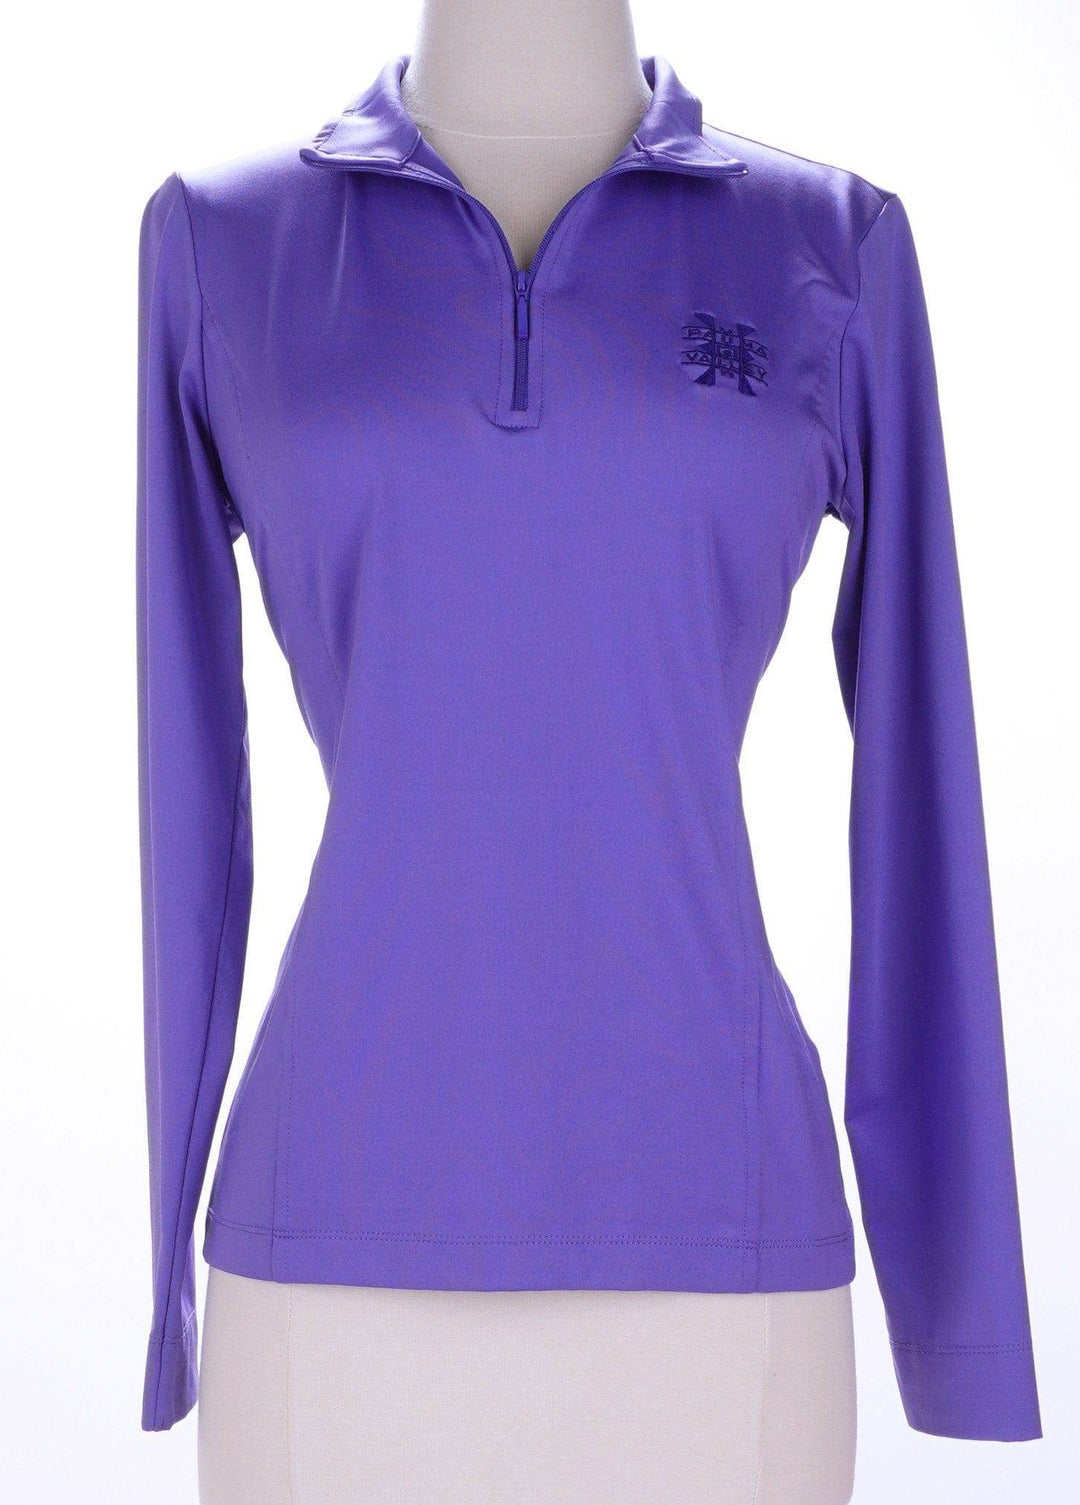 EP Pro Purple / Consigned / Small EP Pro 3-4 Zip Up Long Sleeve - Purple -  Size Small